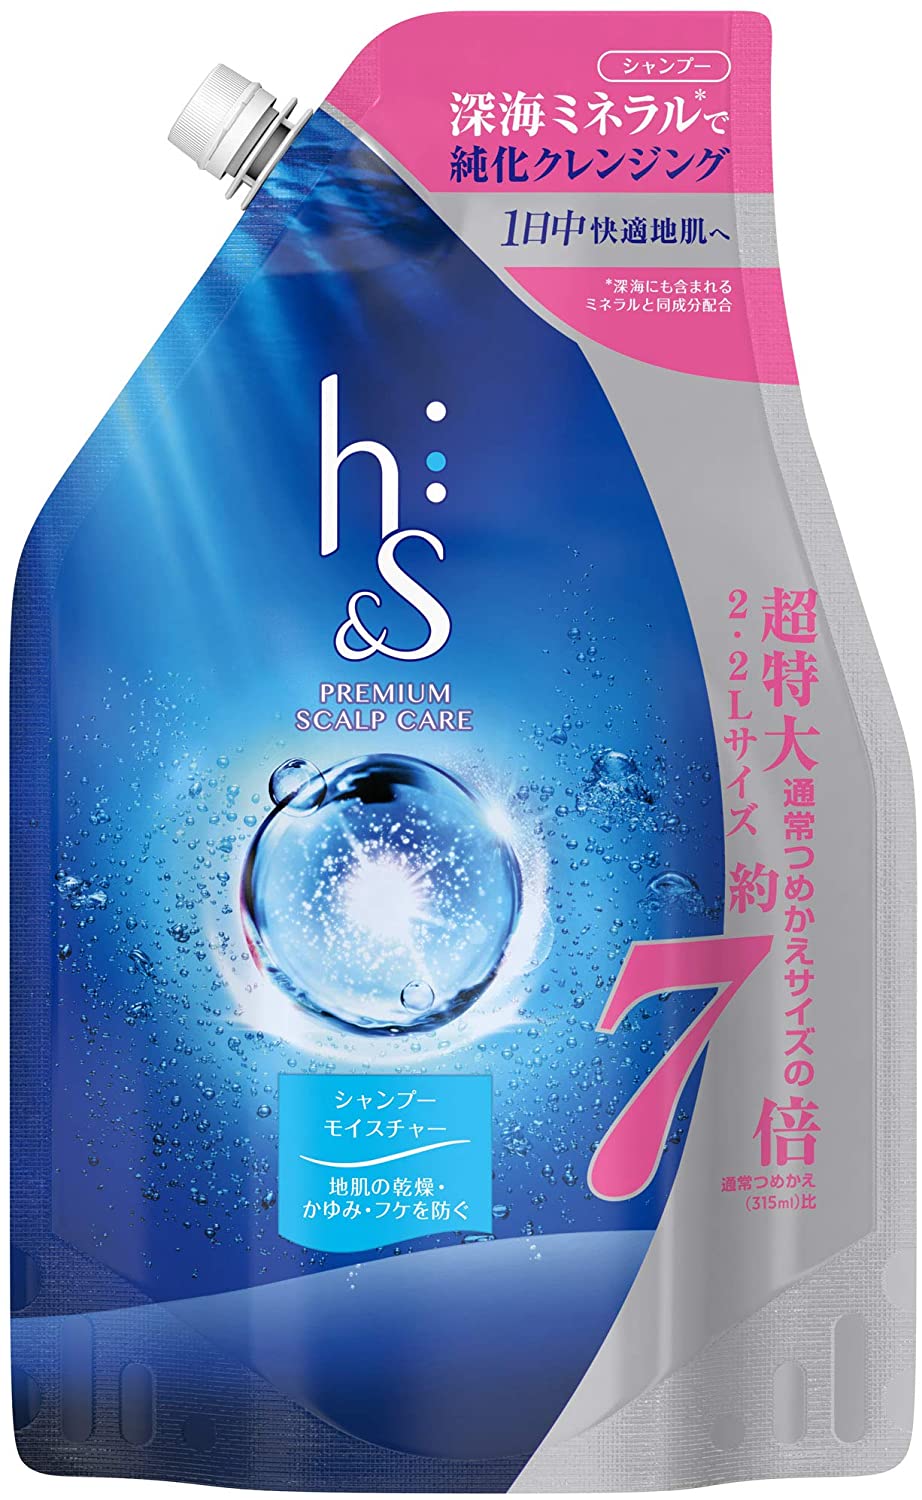 Pouch style unit of Head and Shoulders Japapense anti-dandruff shampoo